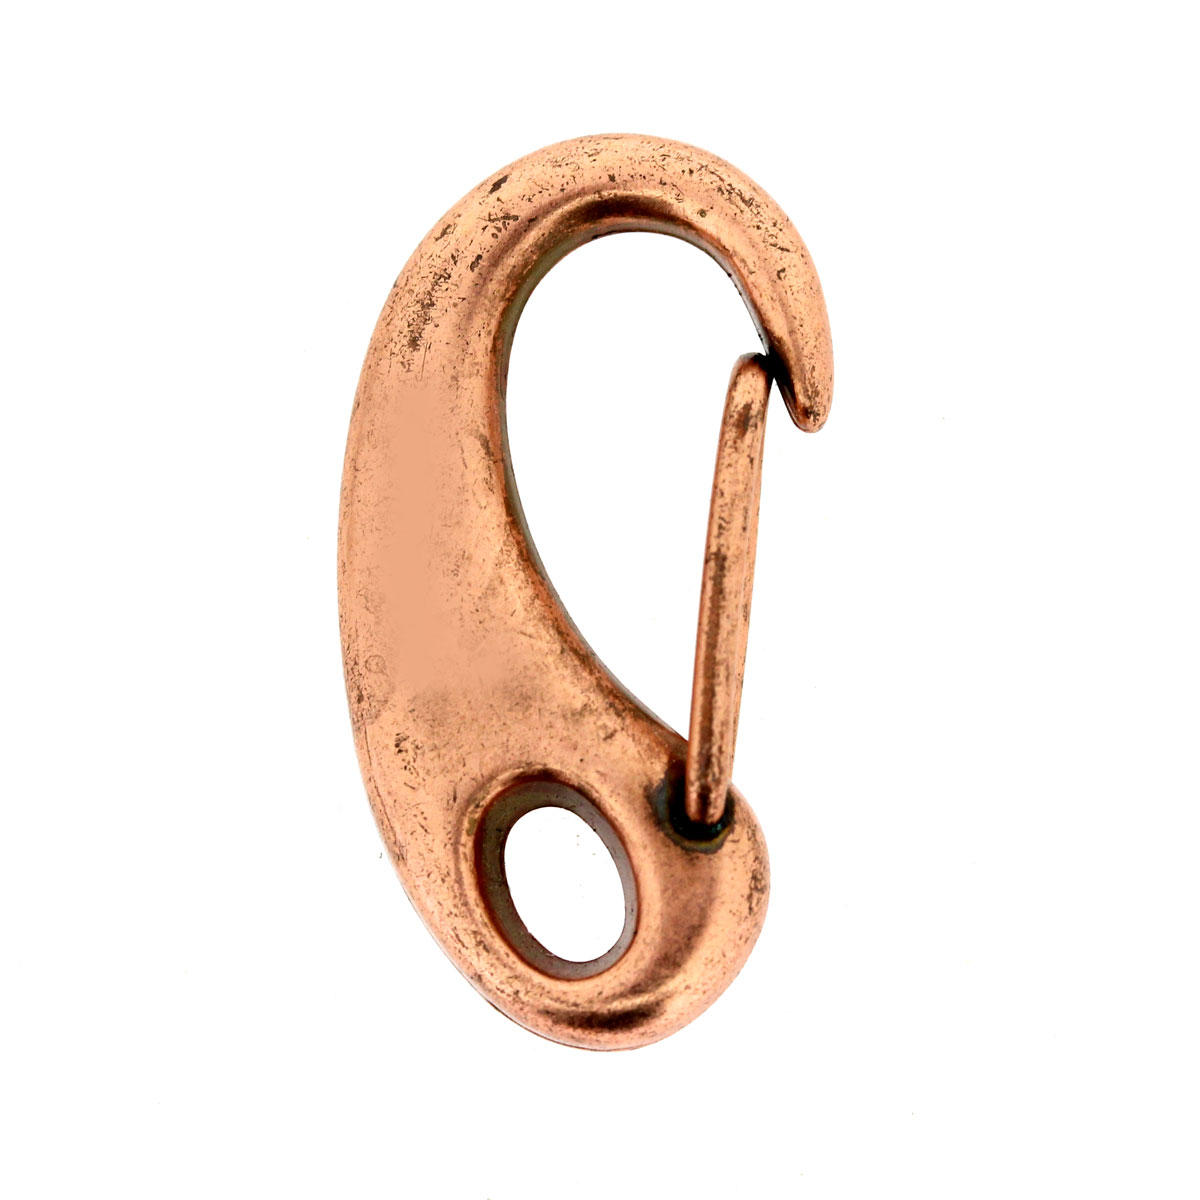 Antique Copper Refined Key Ring Clasp